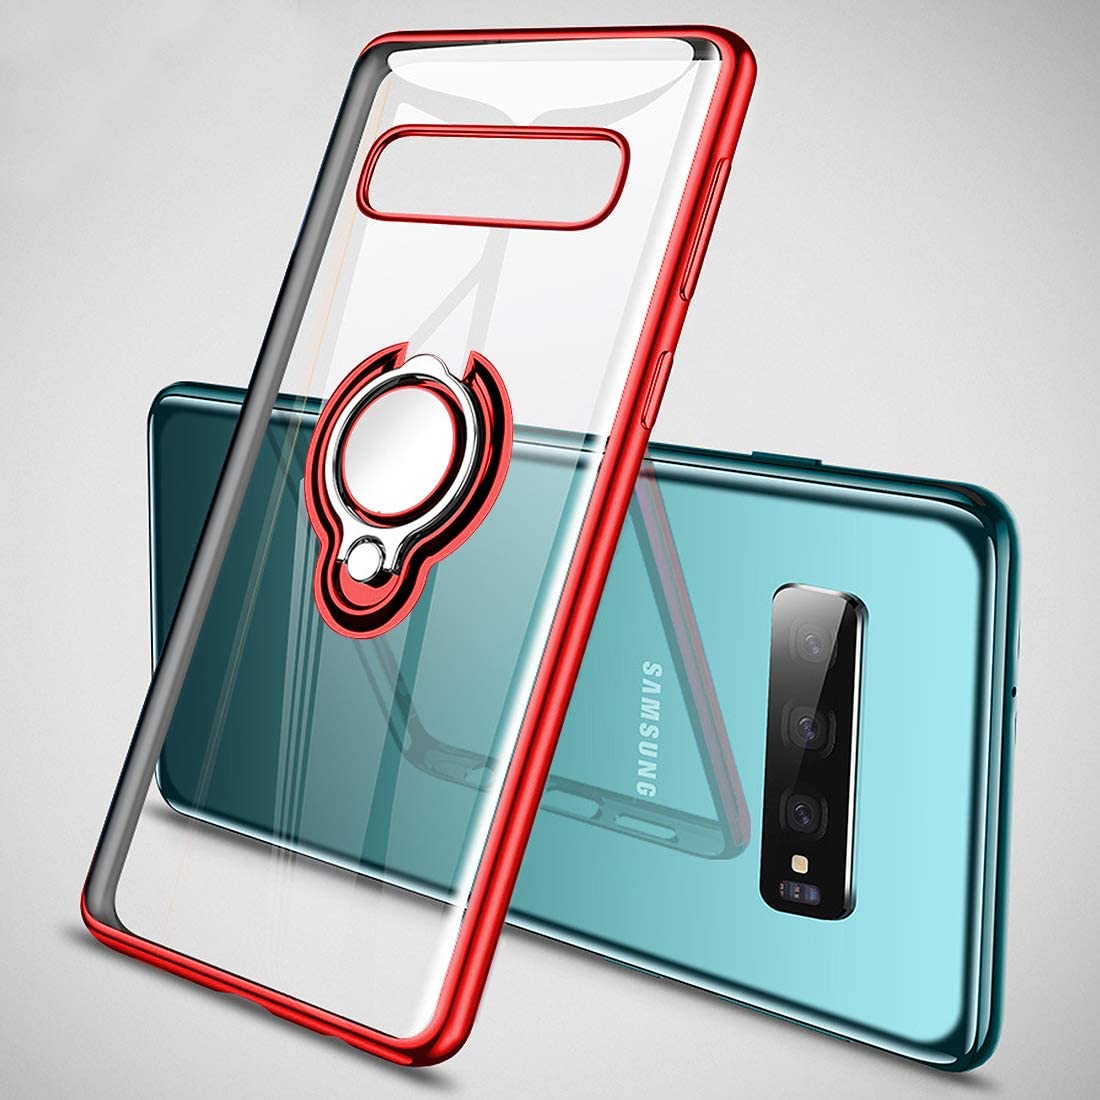 Galaxy S10 Case Clear with Design  S10/S10 plus   - Red - e4cents